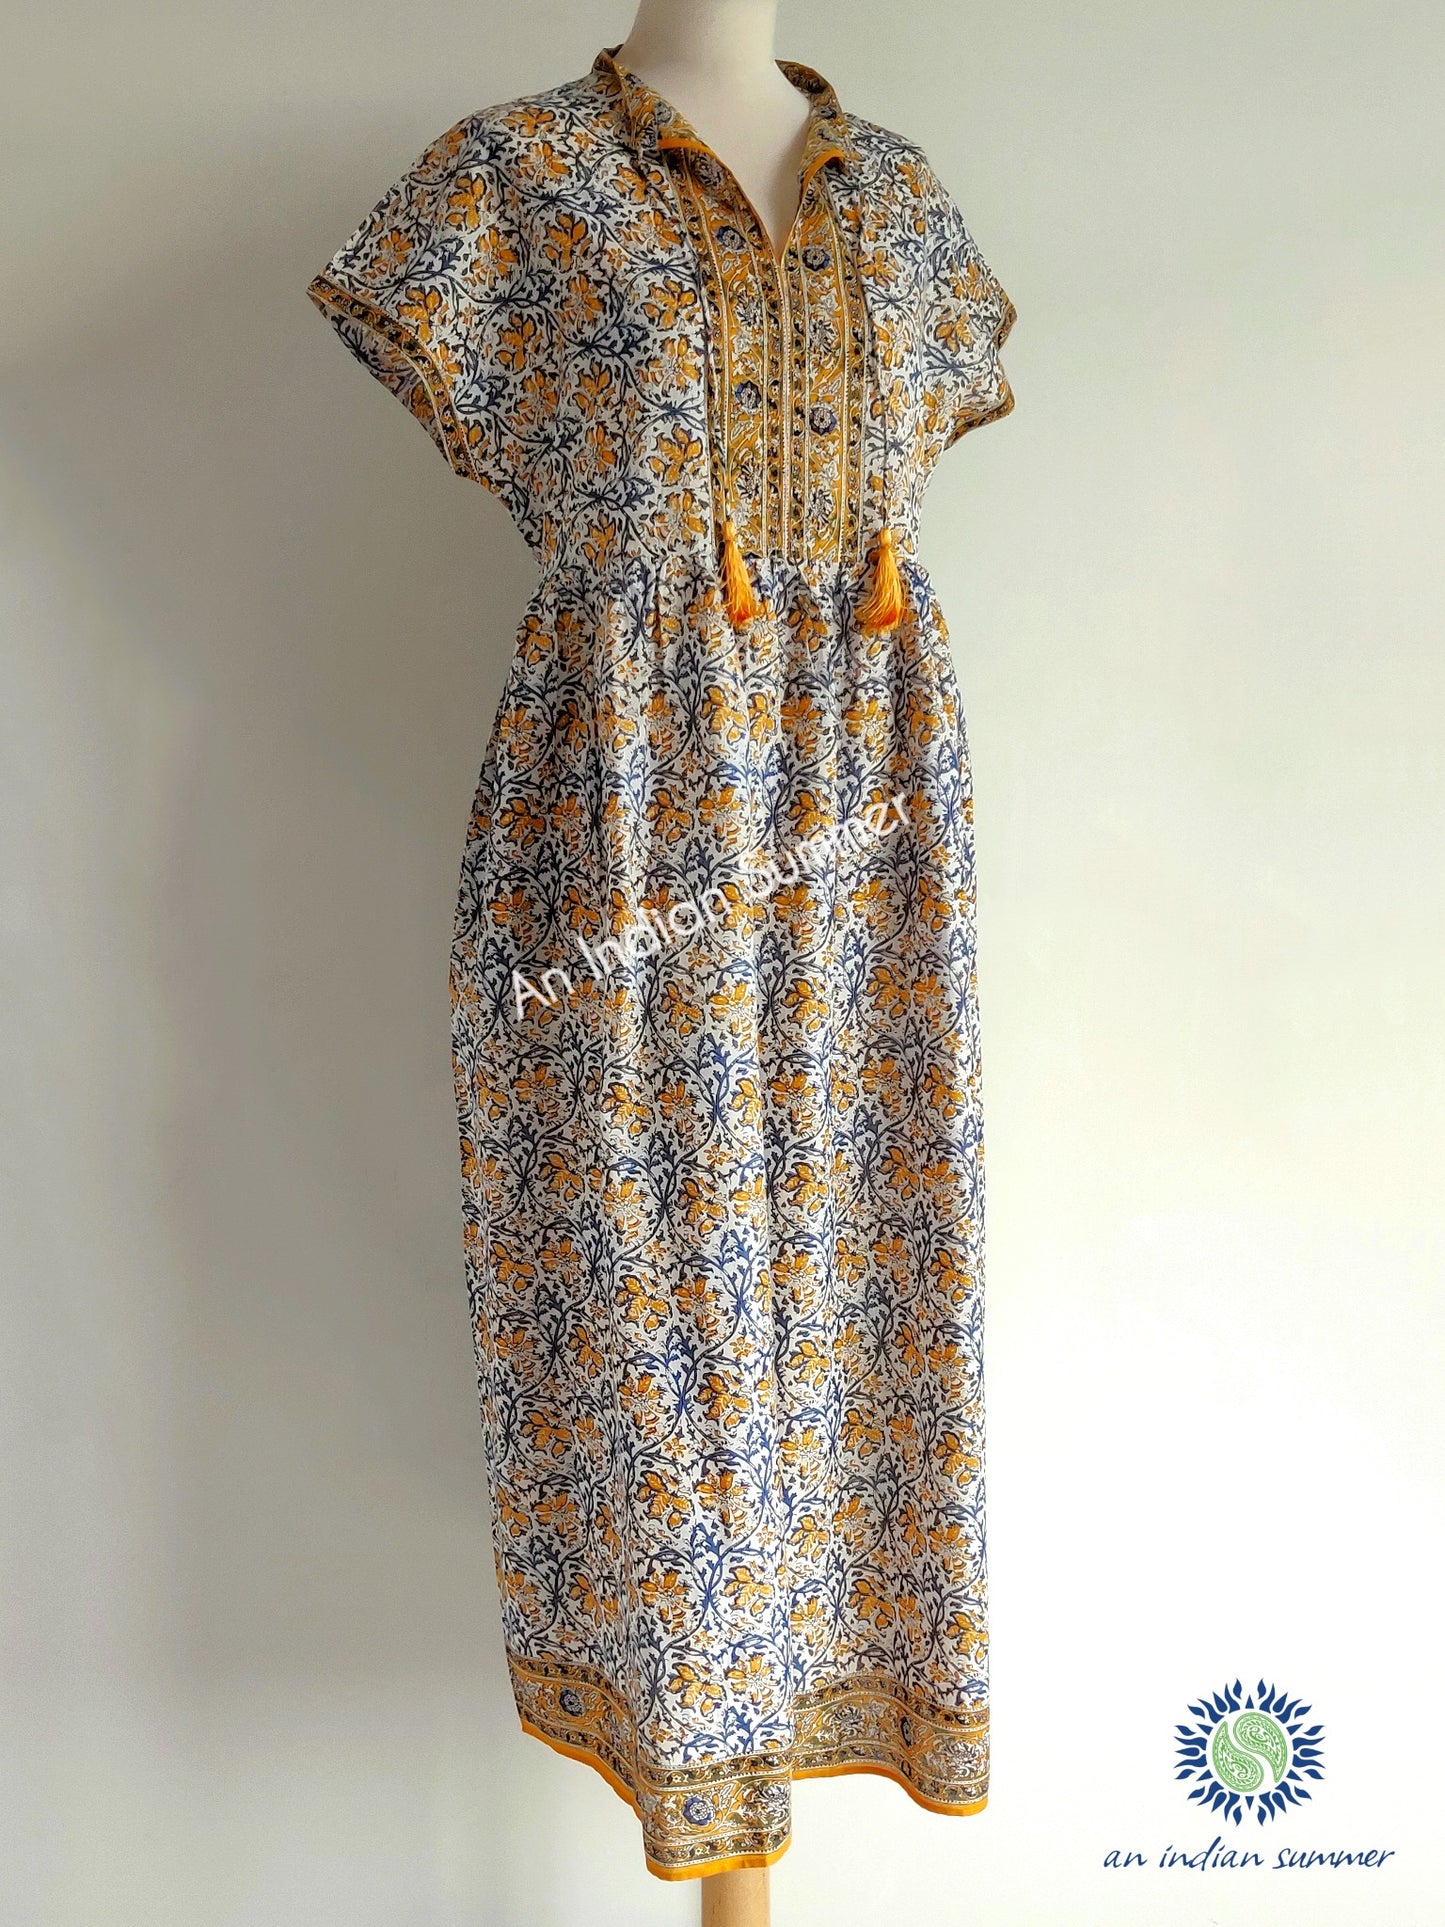 Lilia Dress | Yellow Blue | Floral Print | Block Print Dress | Cotton Voile | An Indian Summer | Seasonless Timeless Sustainable Ethical Authentic Artisan Conscious Clothing Lifestyle Brand